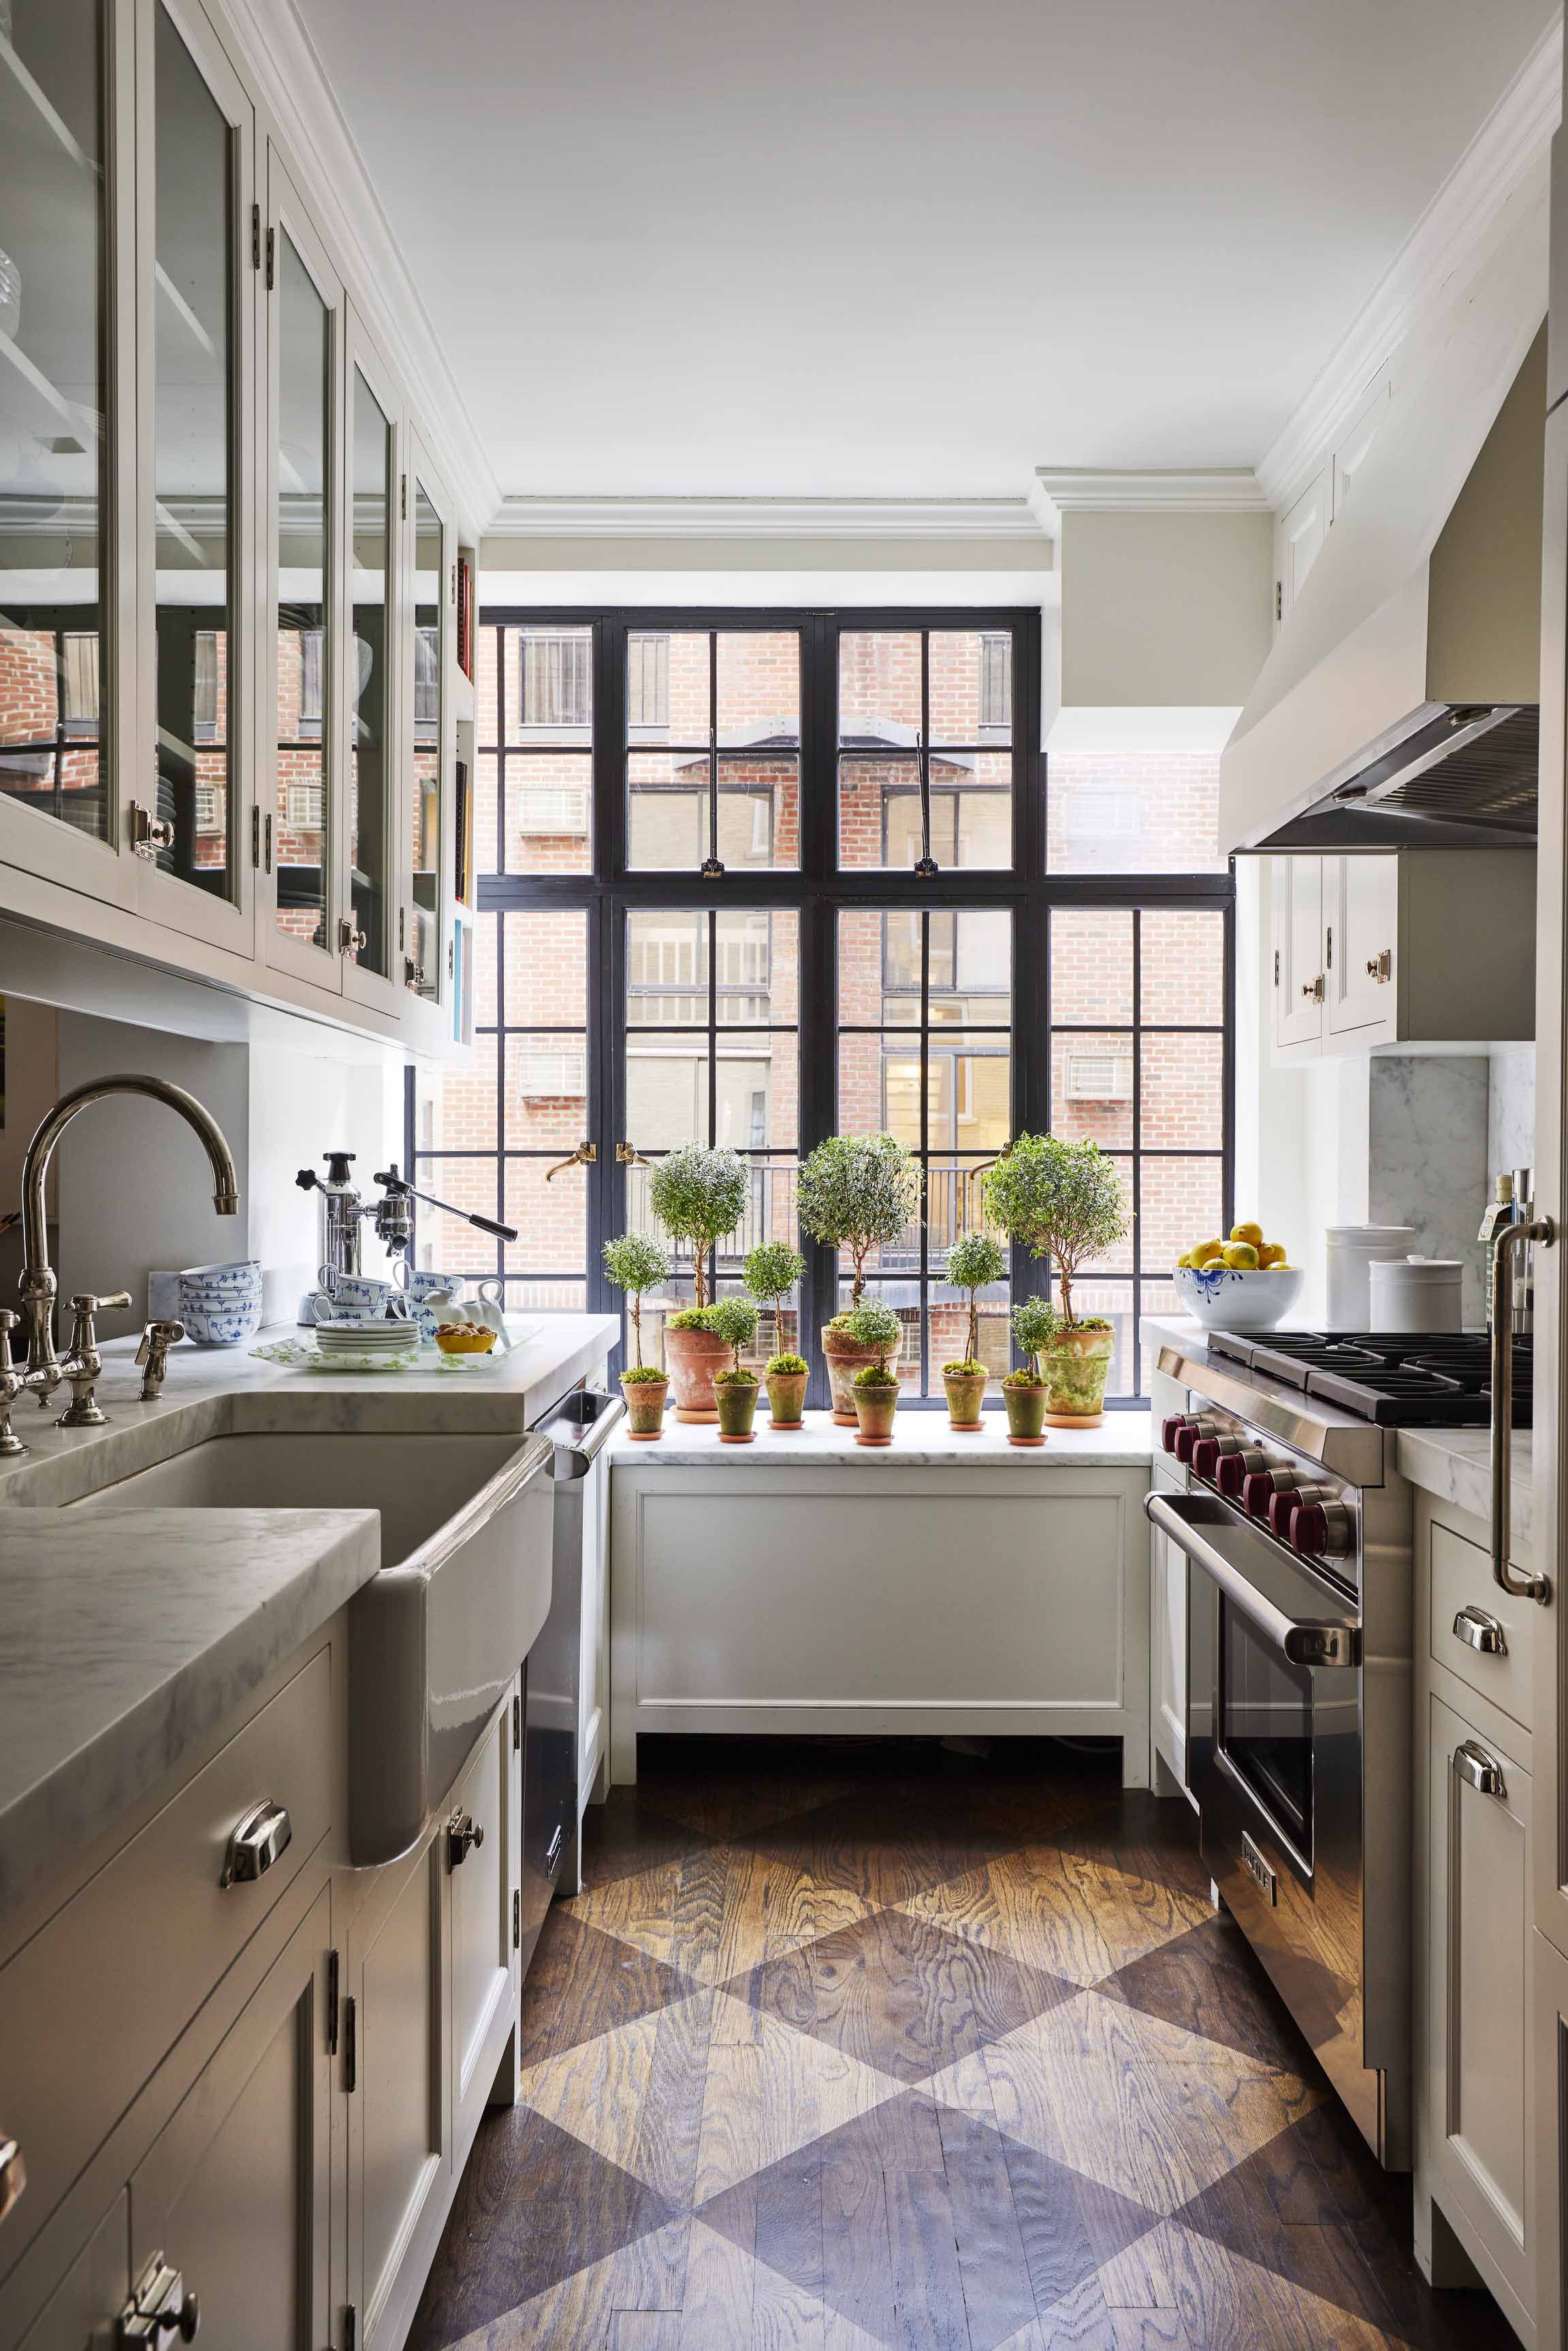 51 Small Kitchen Design Ideas That Make the Most of a Tiny Space |  Architectural Digest